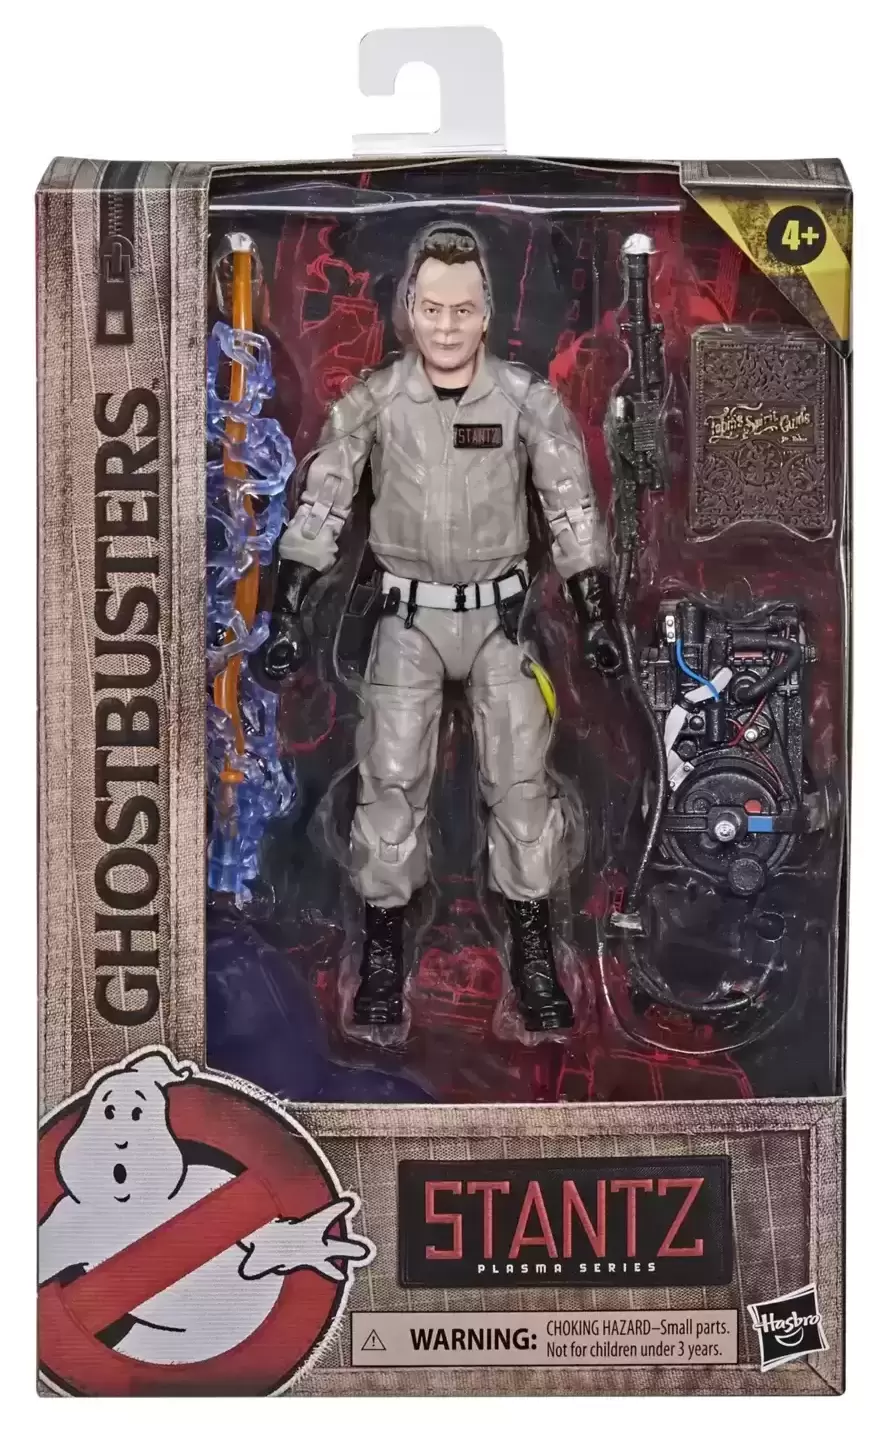 Ghostbusters Plasma Series - Afterlife Ray Stantz